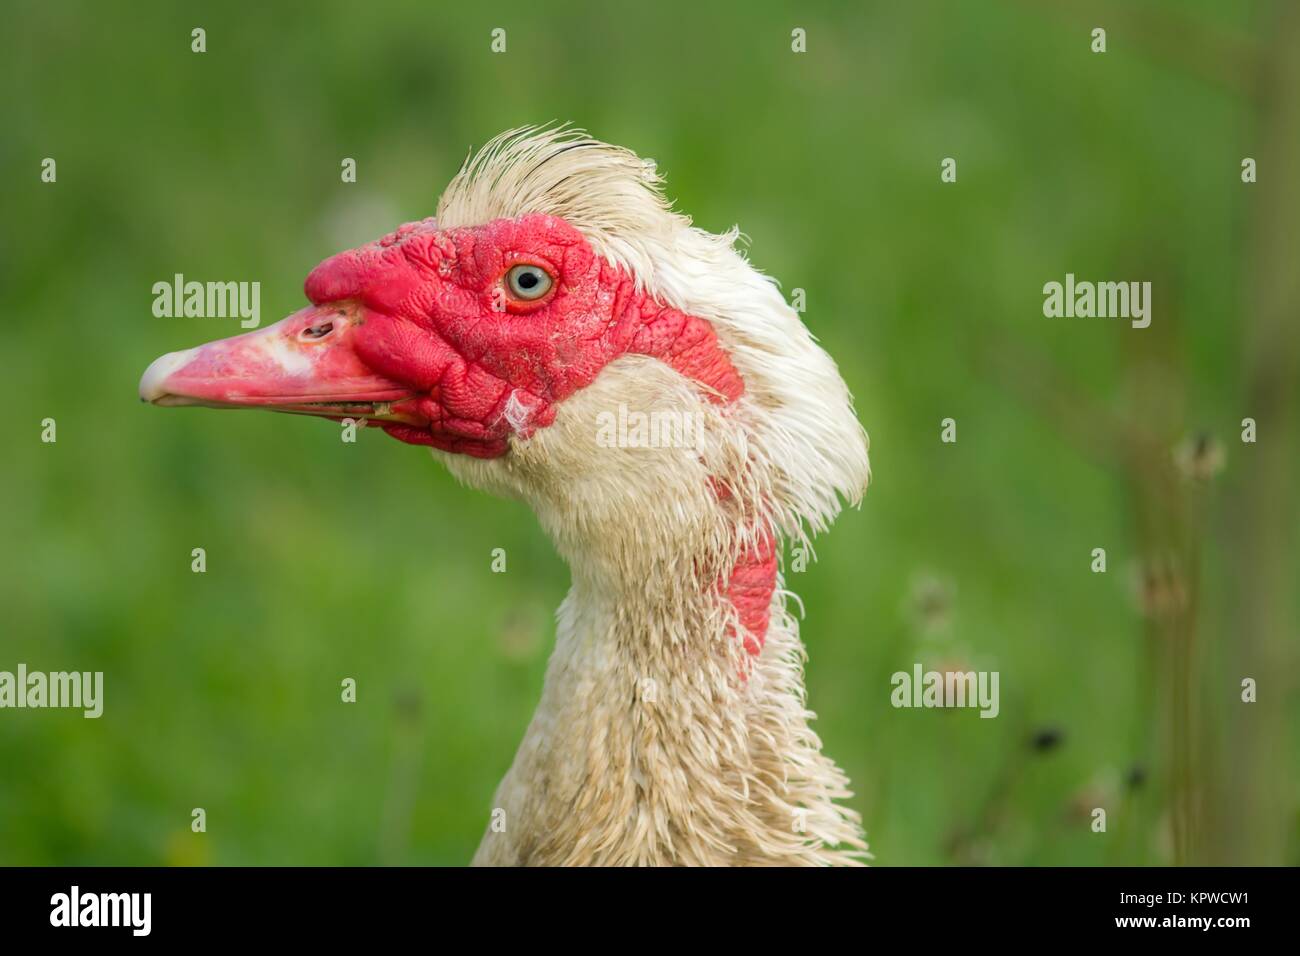 portrait of a male duck warts / portrait of a male duck waiting Stock Photo